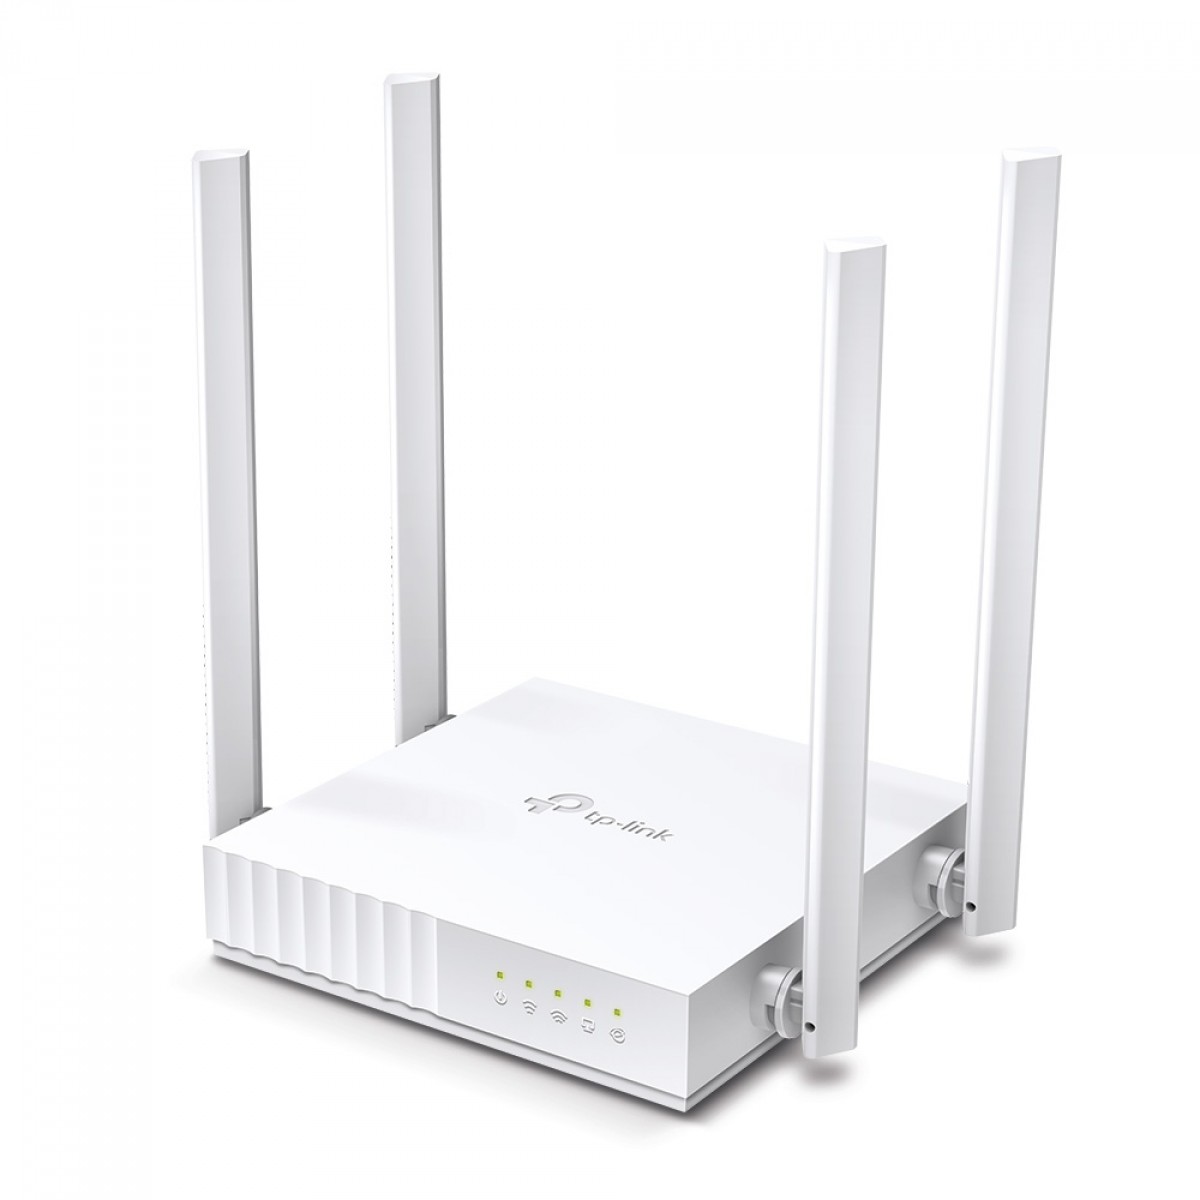 Roteador TP-LINK Wireless Archer C21, Dual Band, AC750, C21